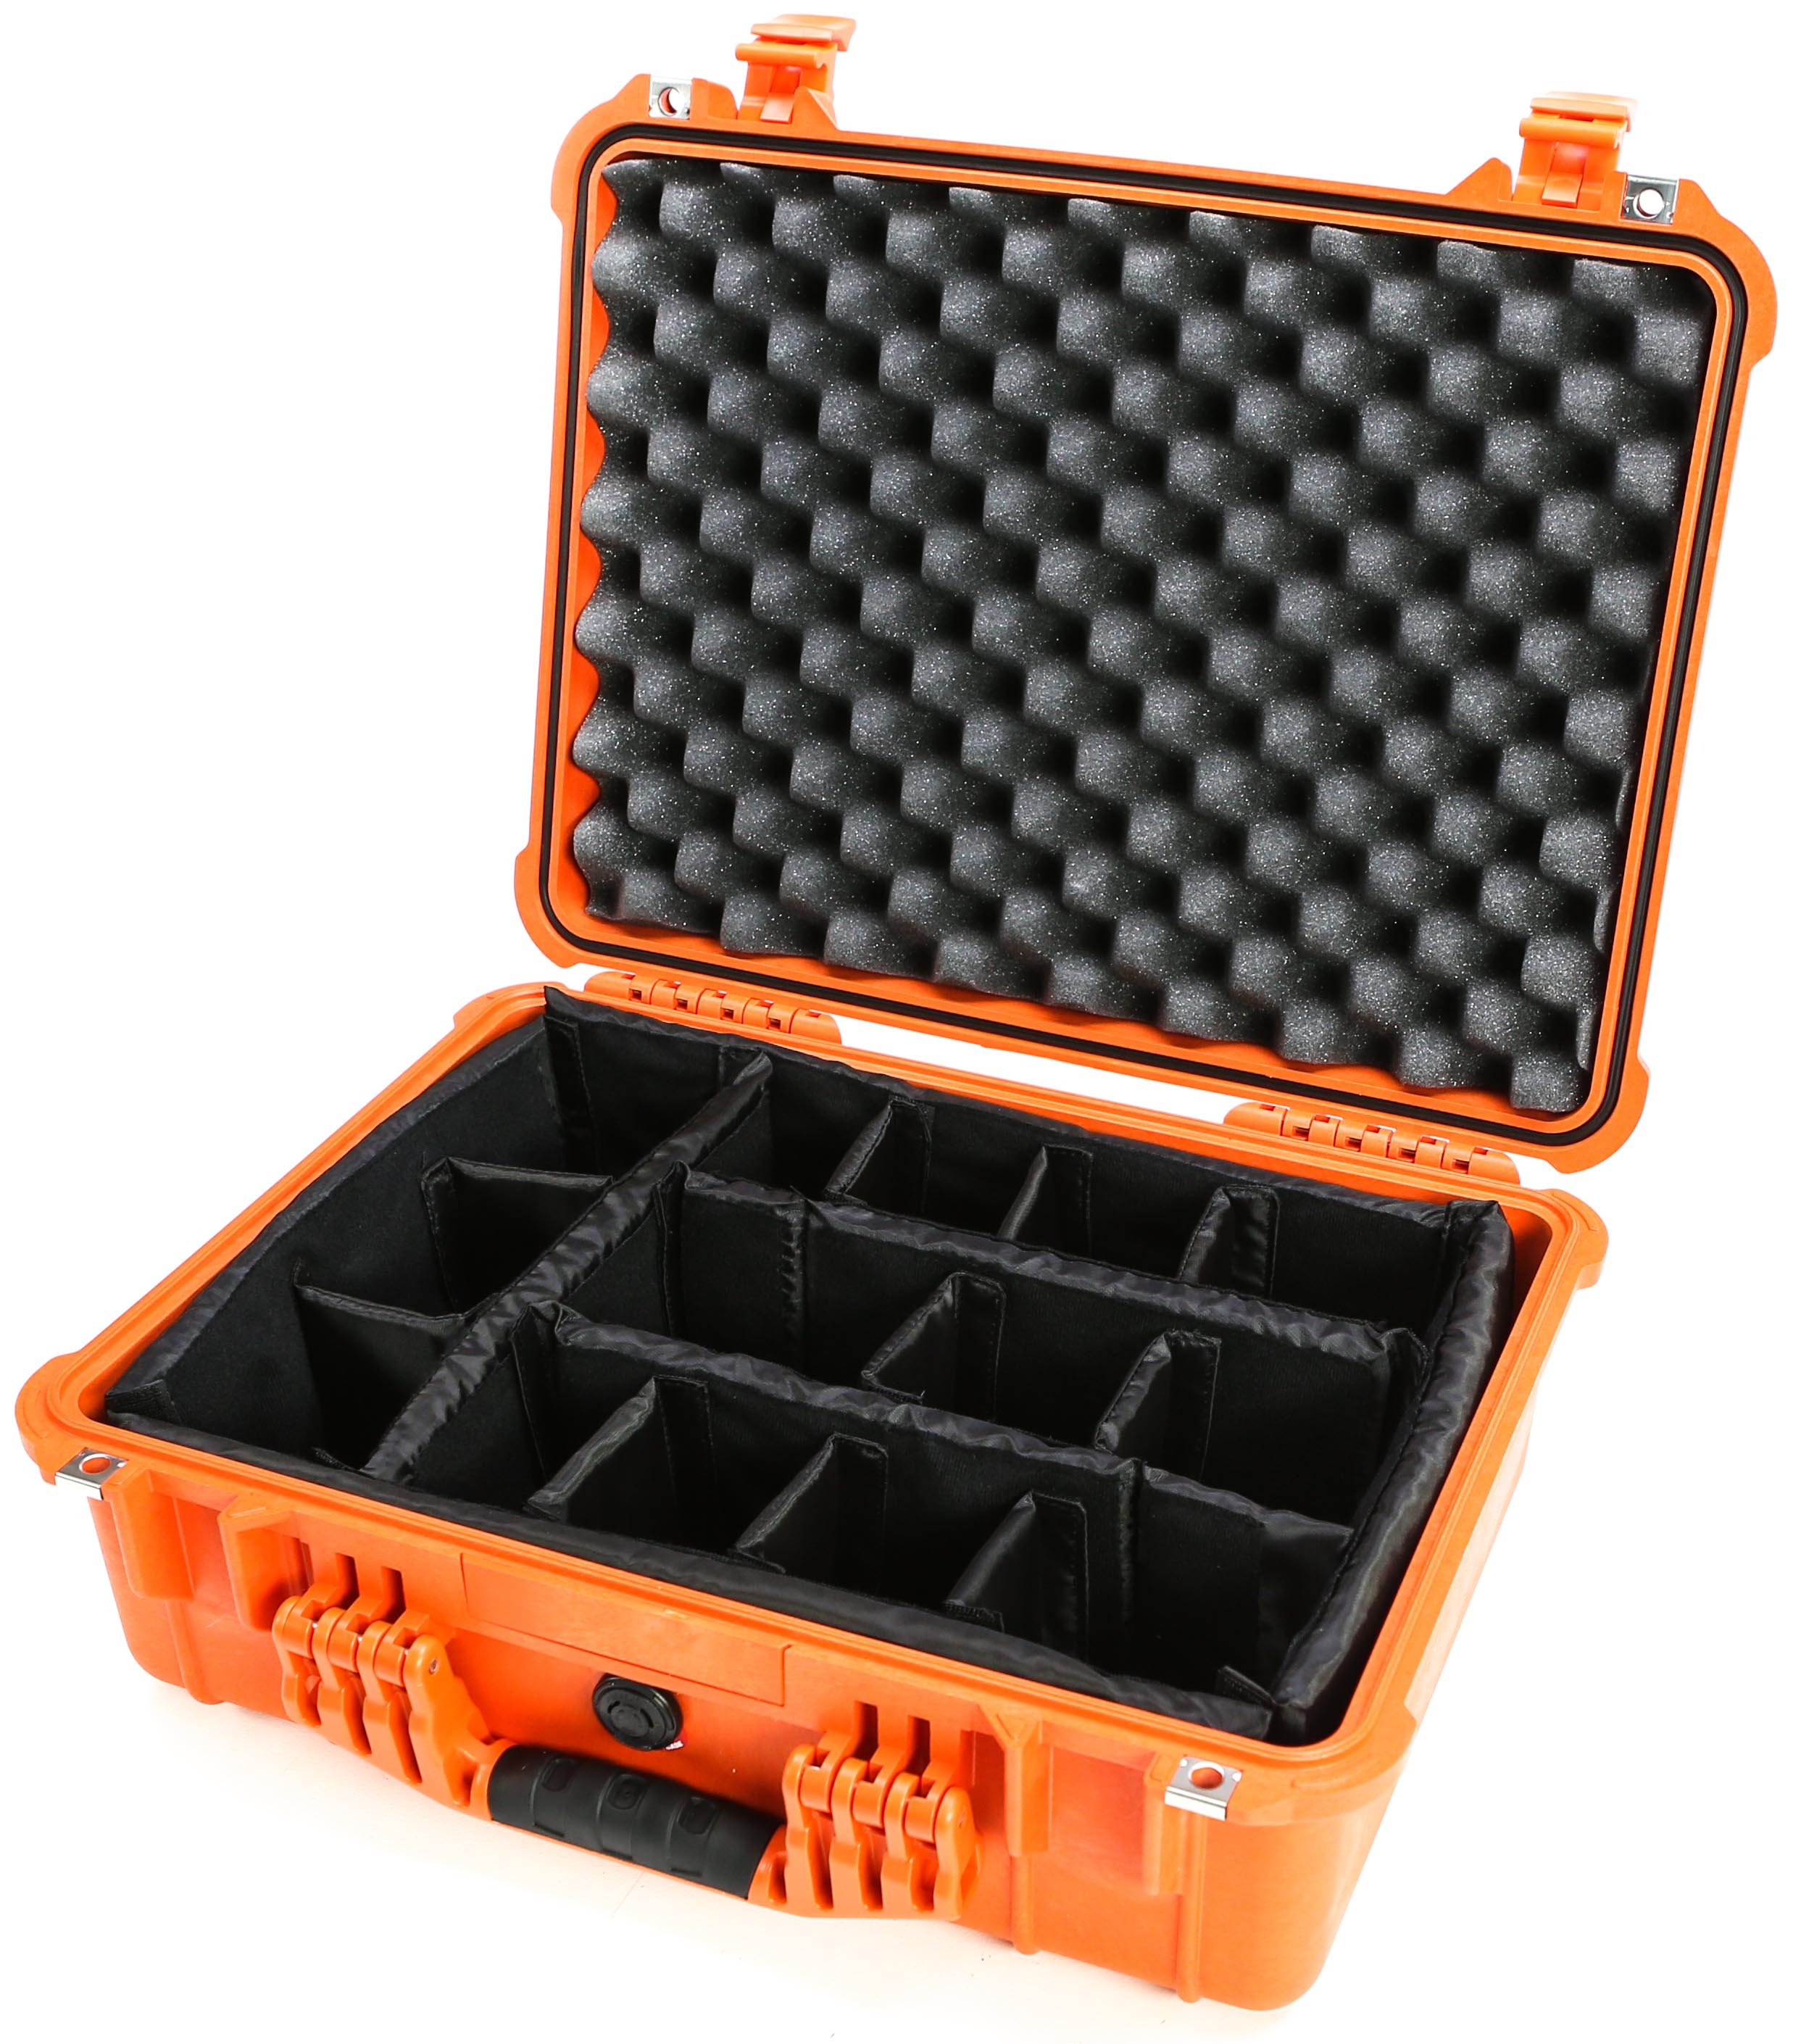 Pelican 1524 Case with Padded Dividers (Orange)